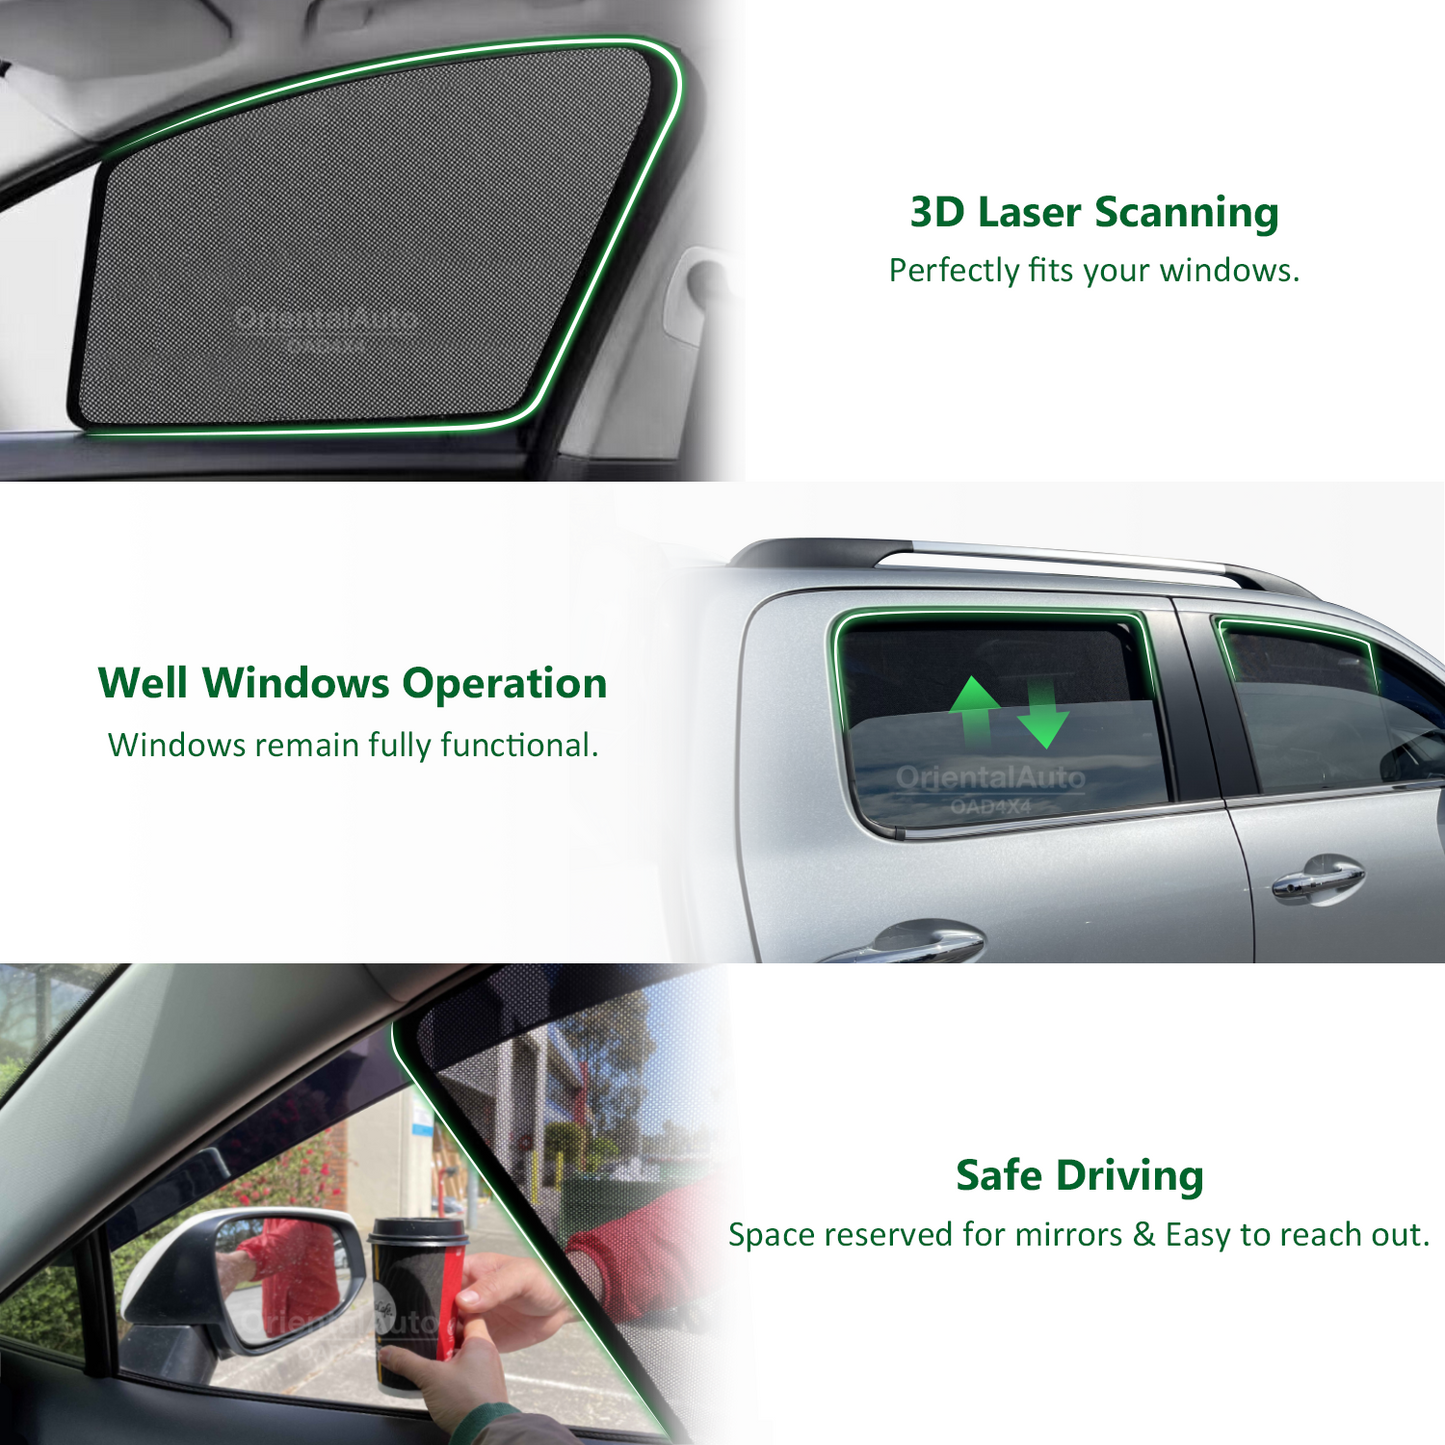 4PCS Magnetic Sun Shade for BMW X3 G01 2017-Onwards Window Sun Shades UV Protection Mesh Cover